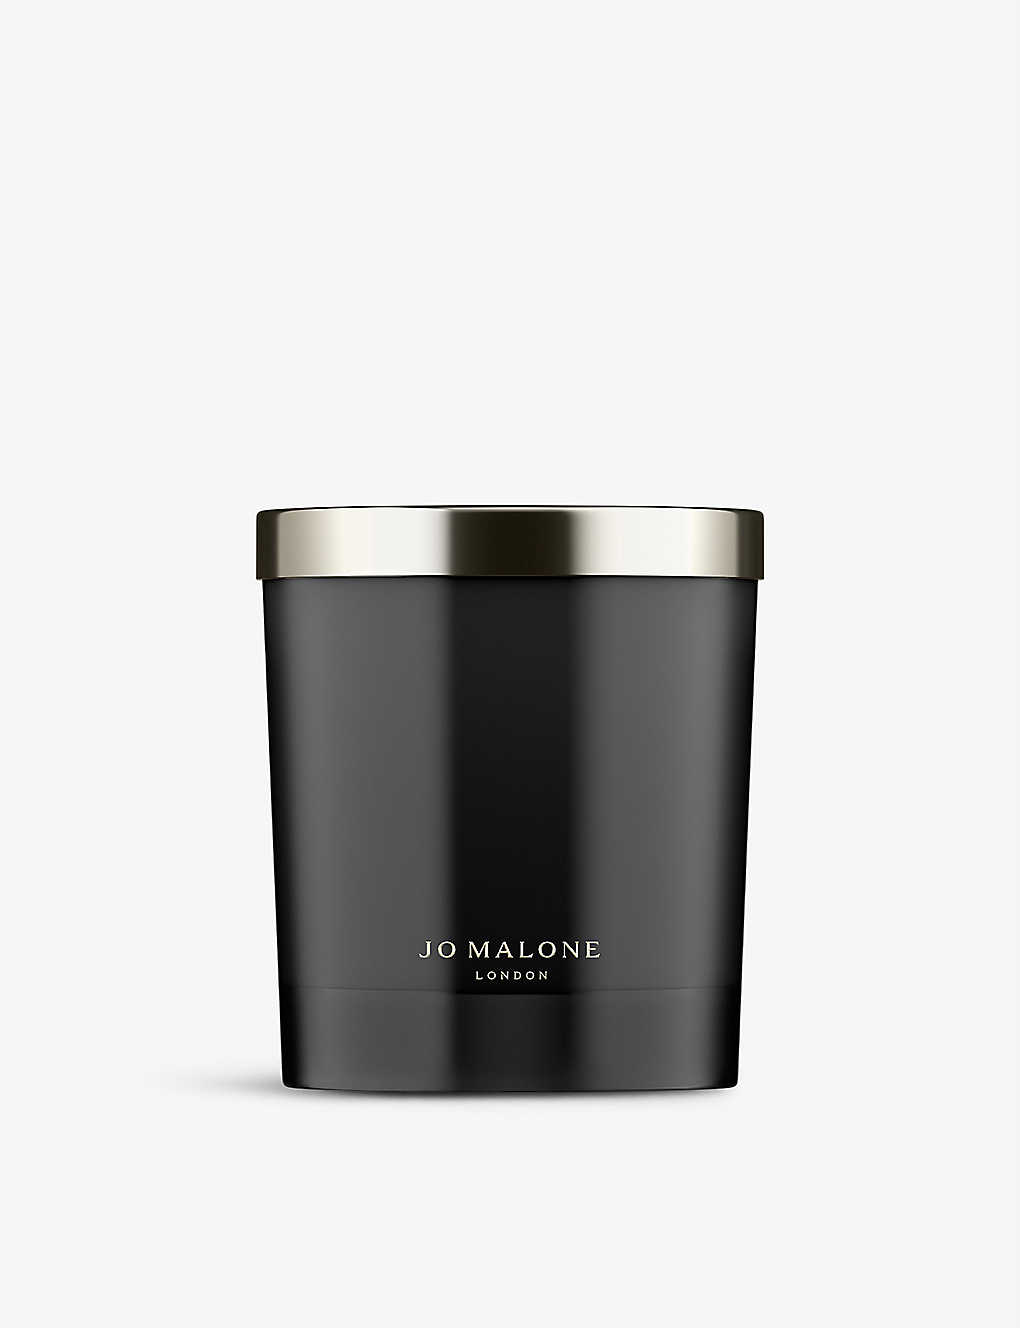 Jo Malone London Velvet Rose & Oud Deluxe Scented Candle 600g